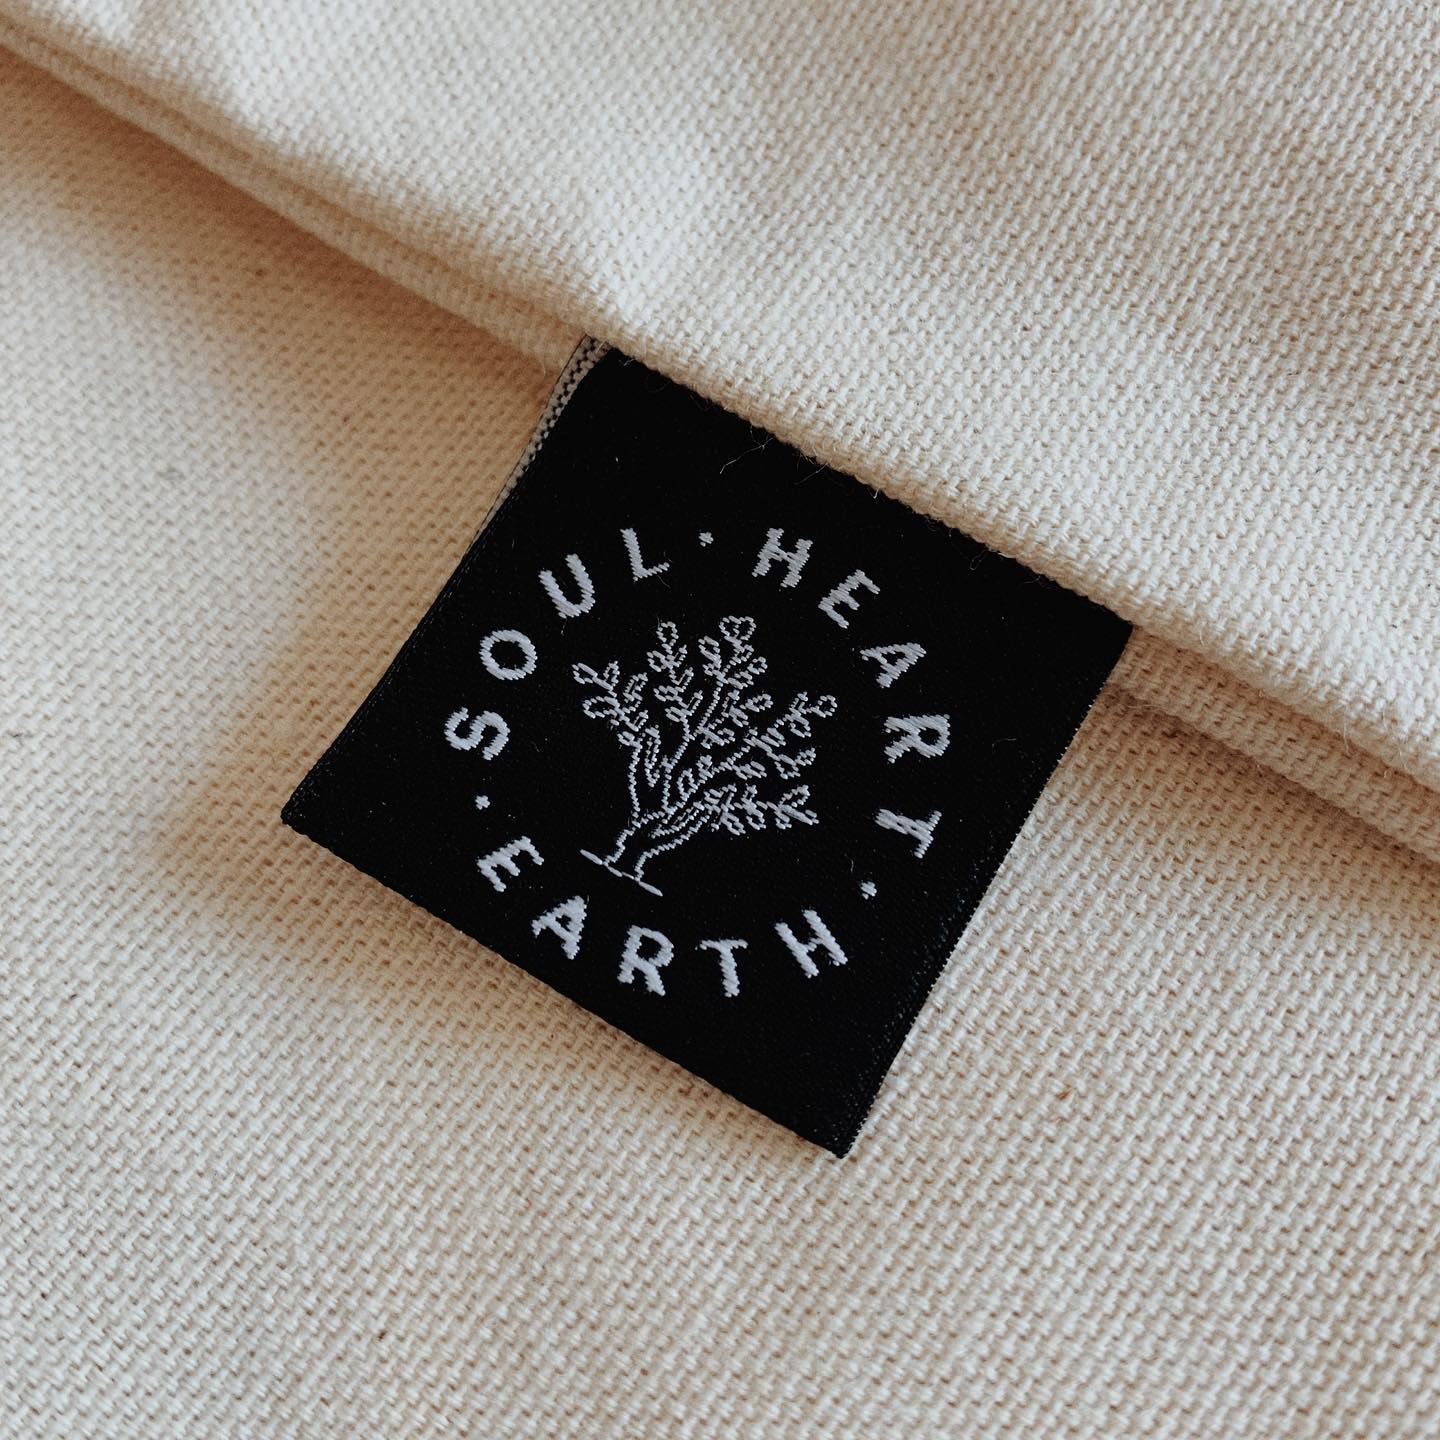 Beautiful woven cotten label of the SHE Logo